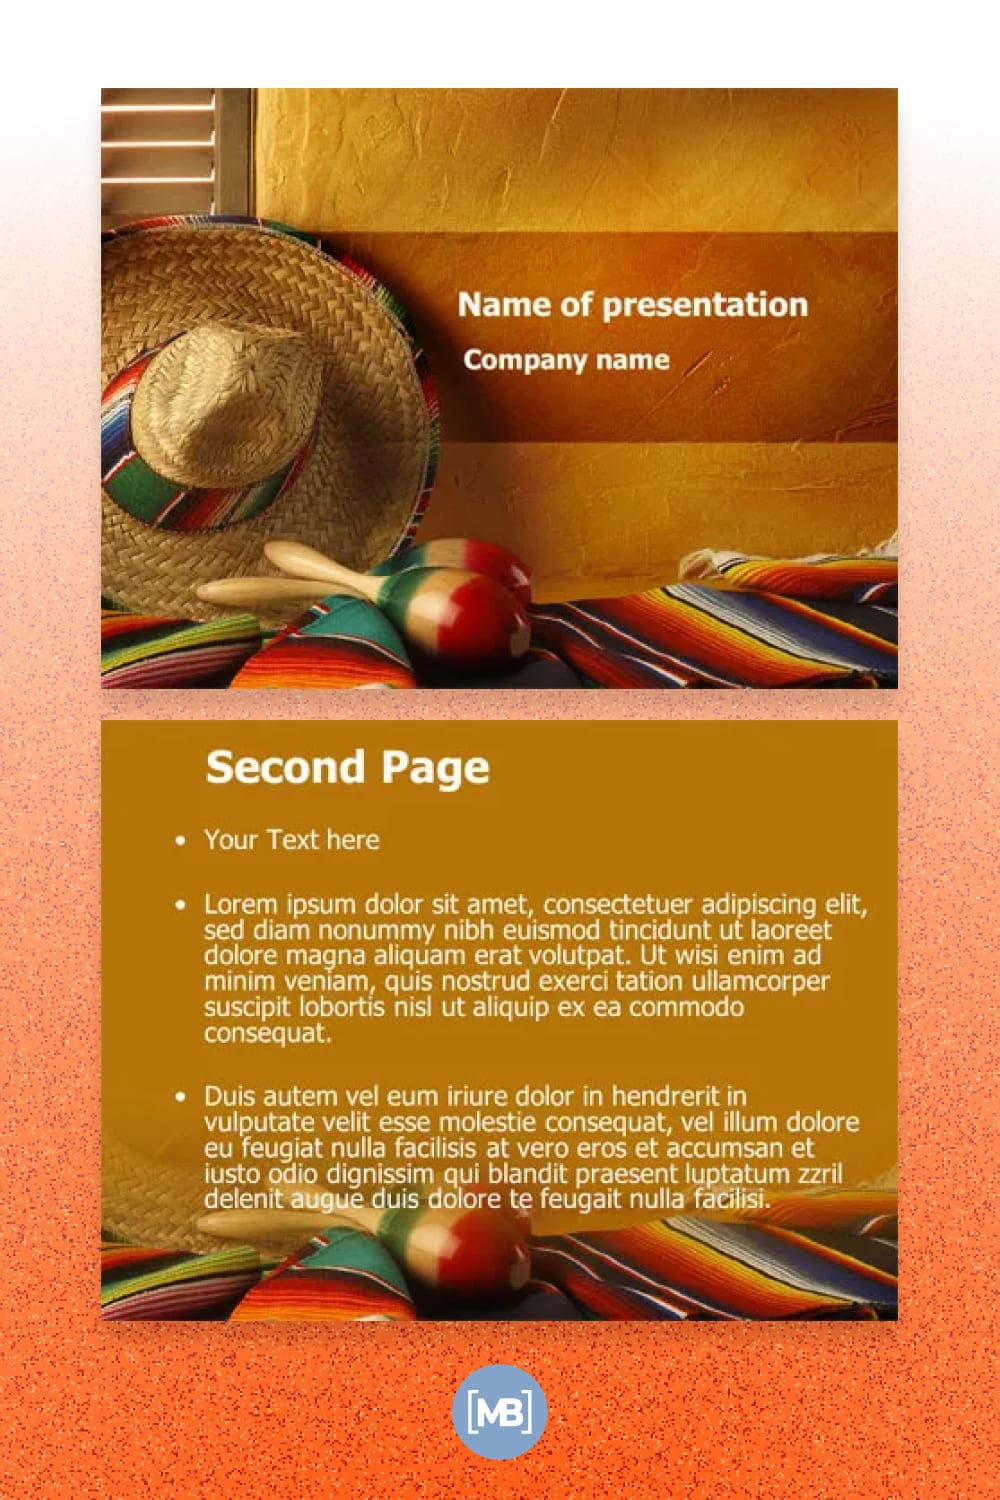 Tour to mexico powerpoint template.